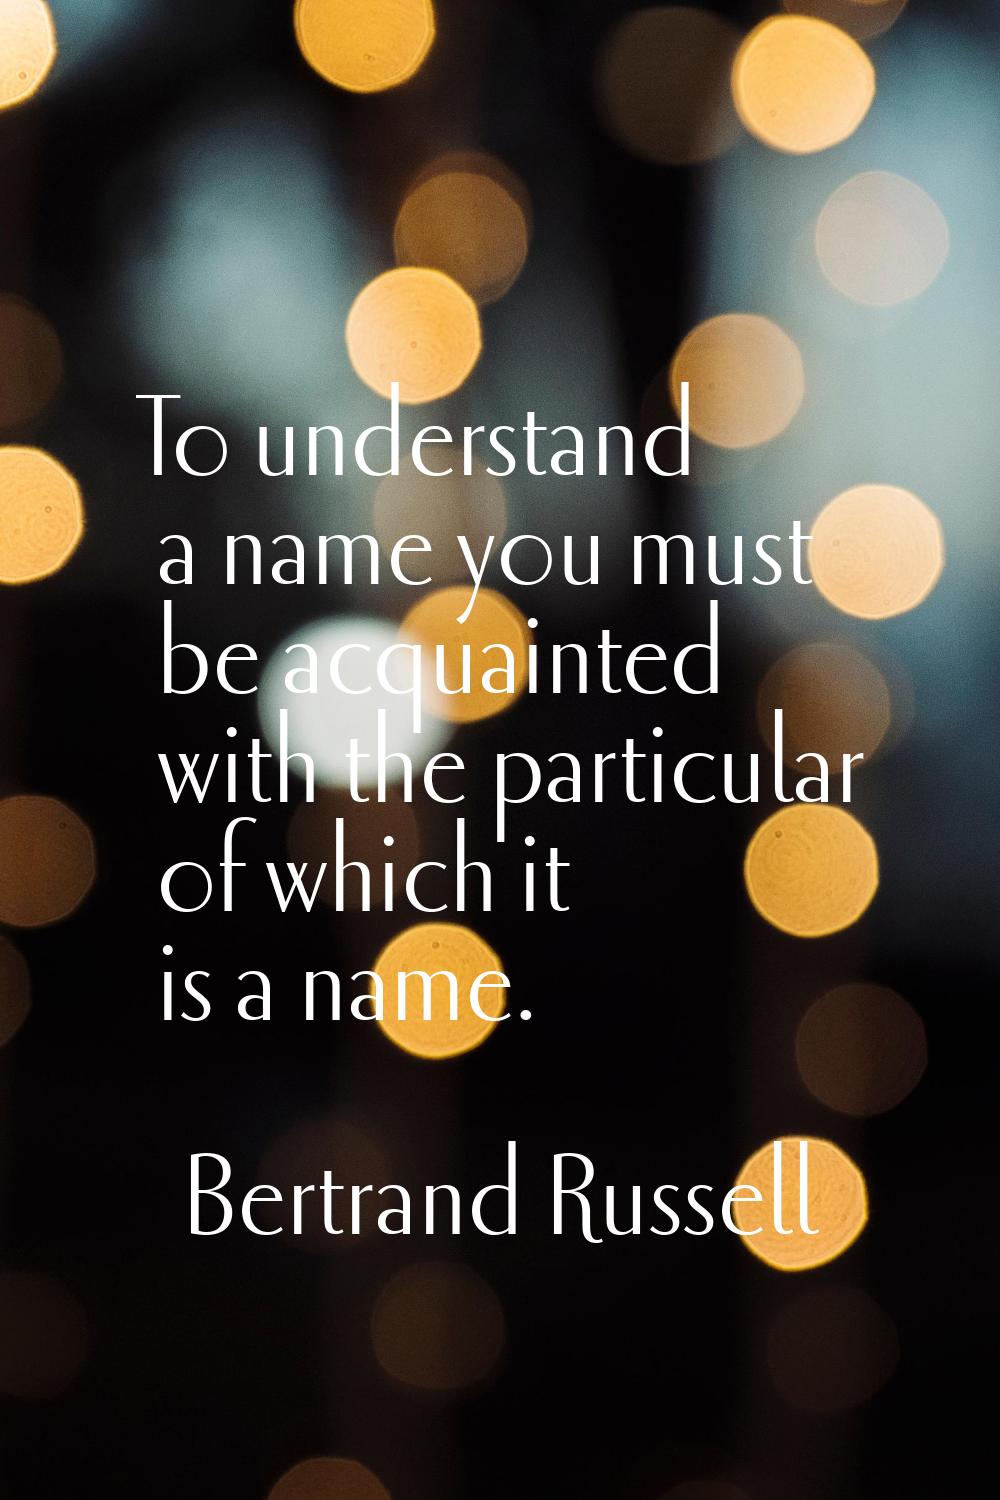 To understand a name you must be acquainted with the particular of which it is a name.